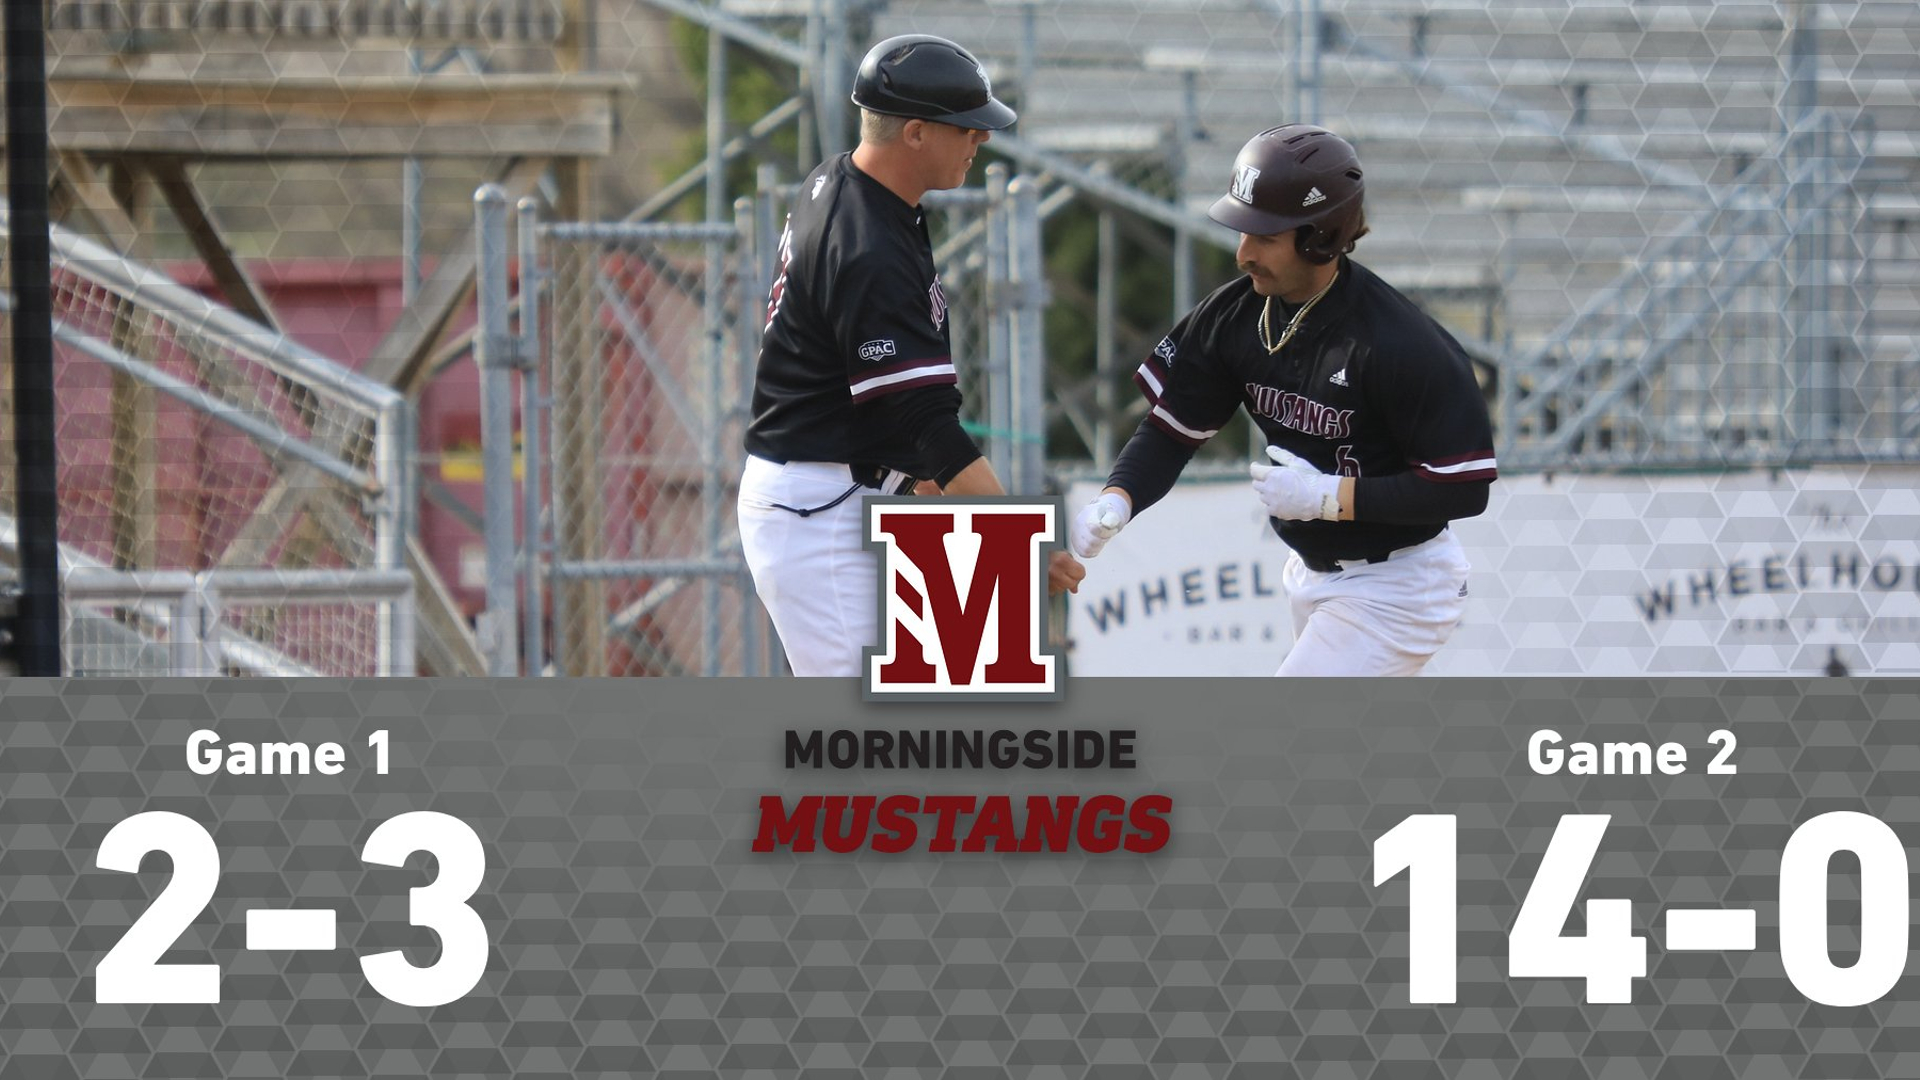 Morningside loses game 1 2-3, wins game 2 14-0